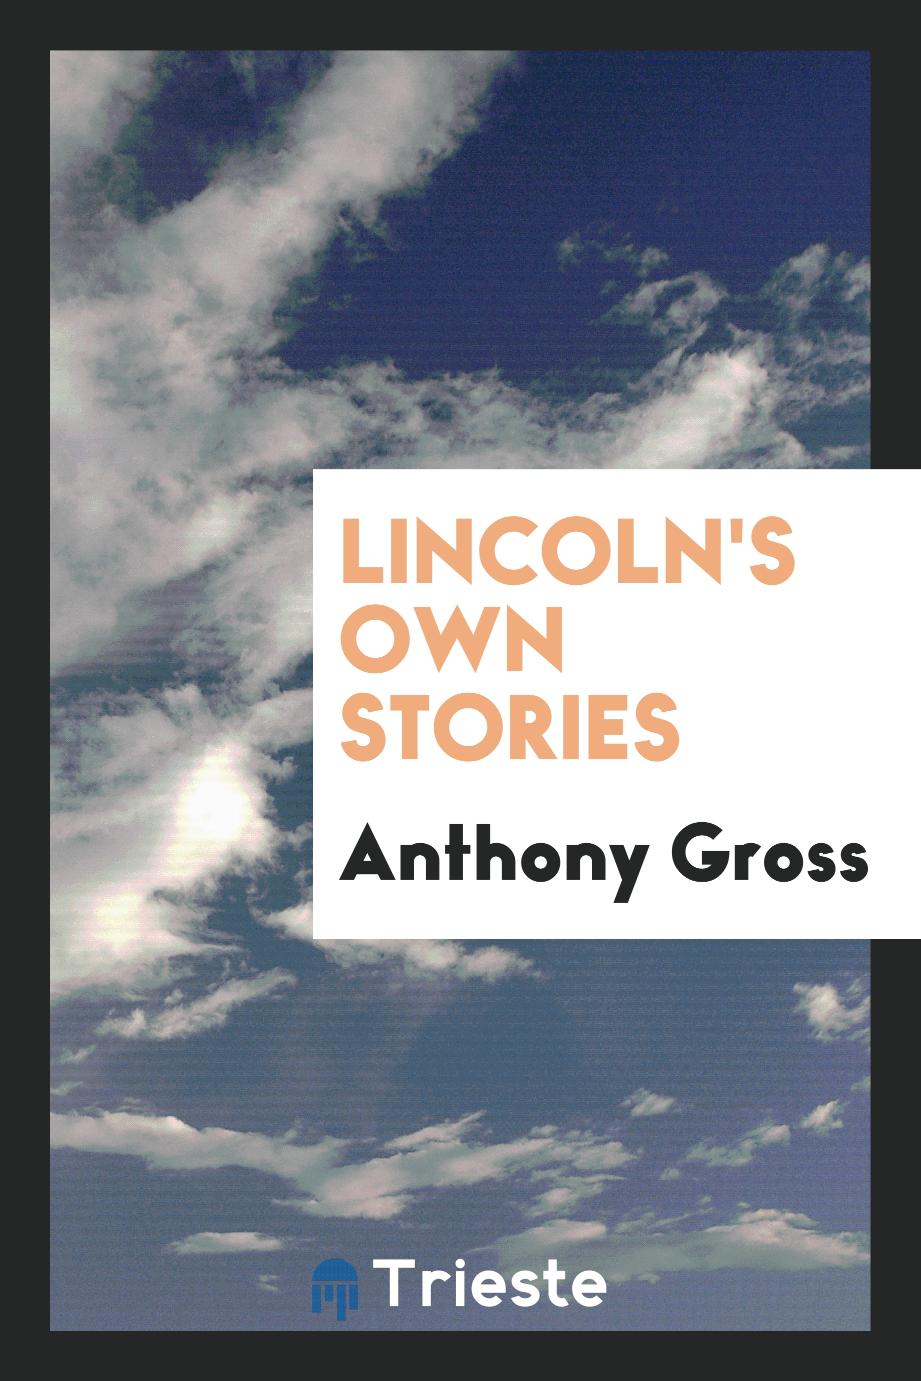 Lincoln's own stories